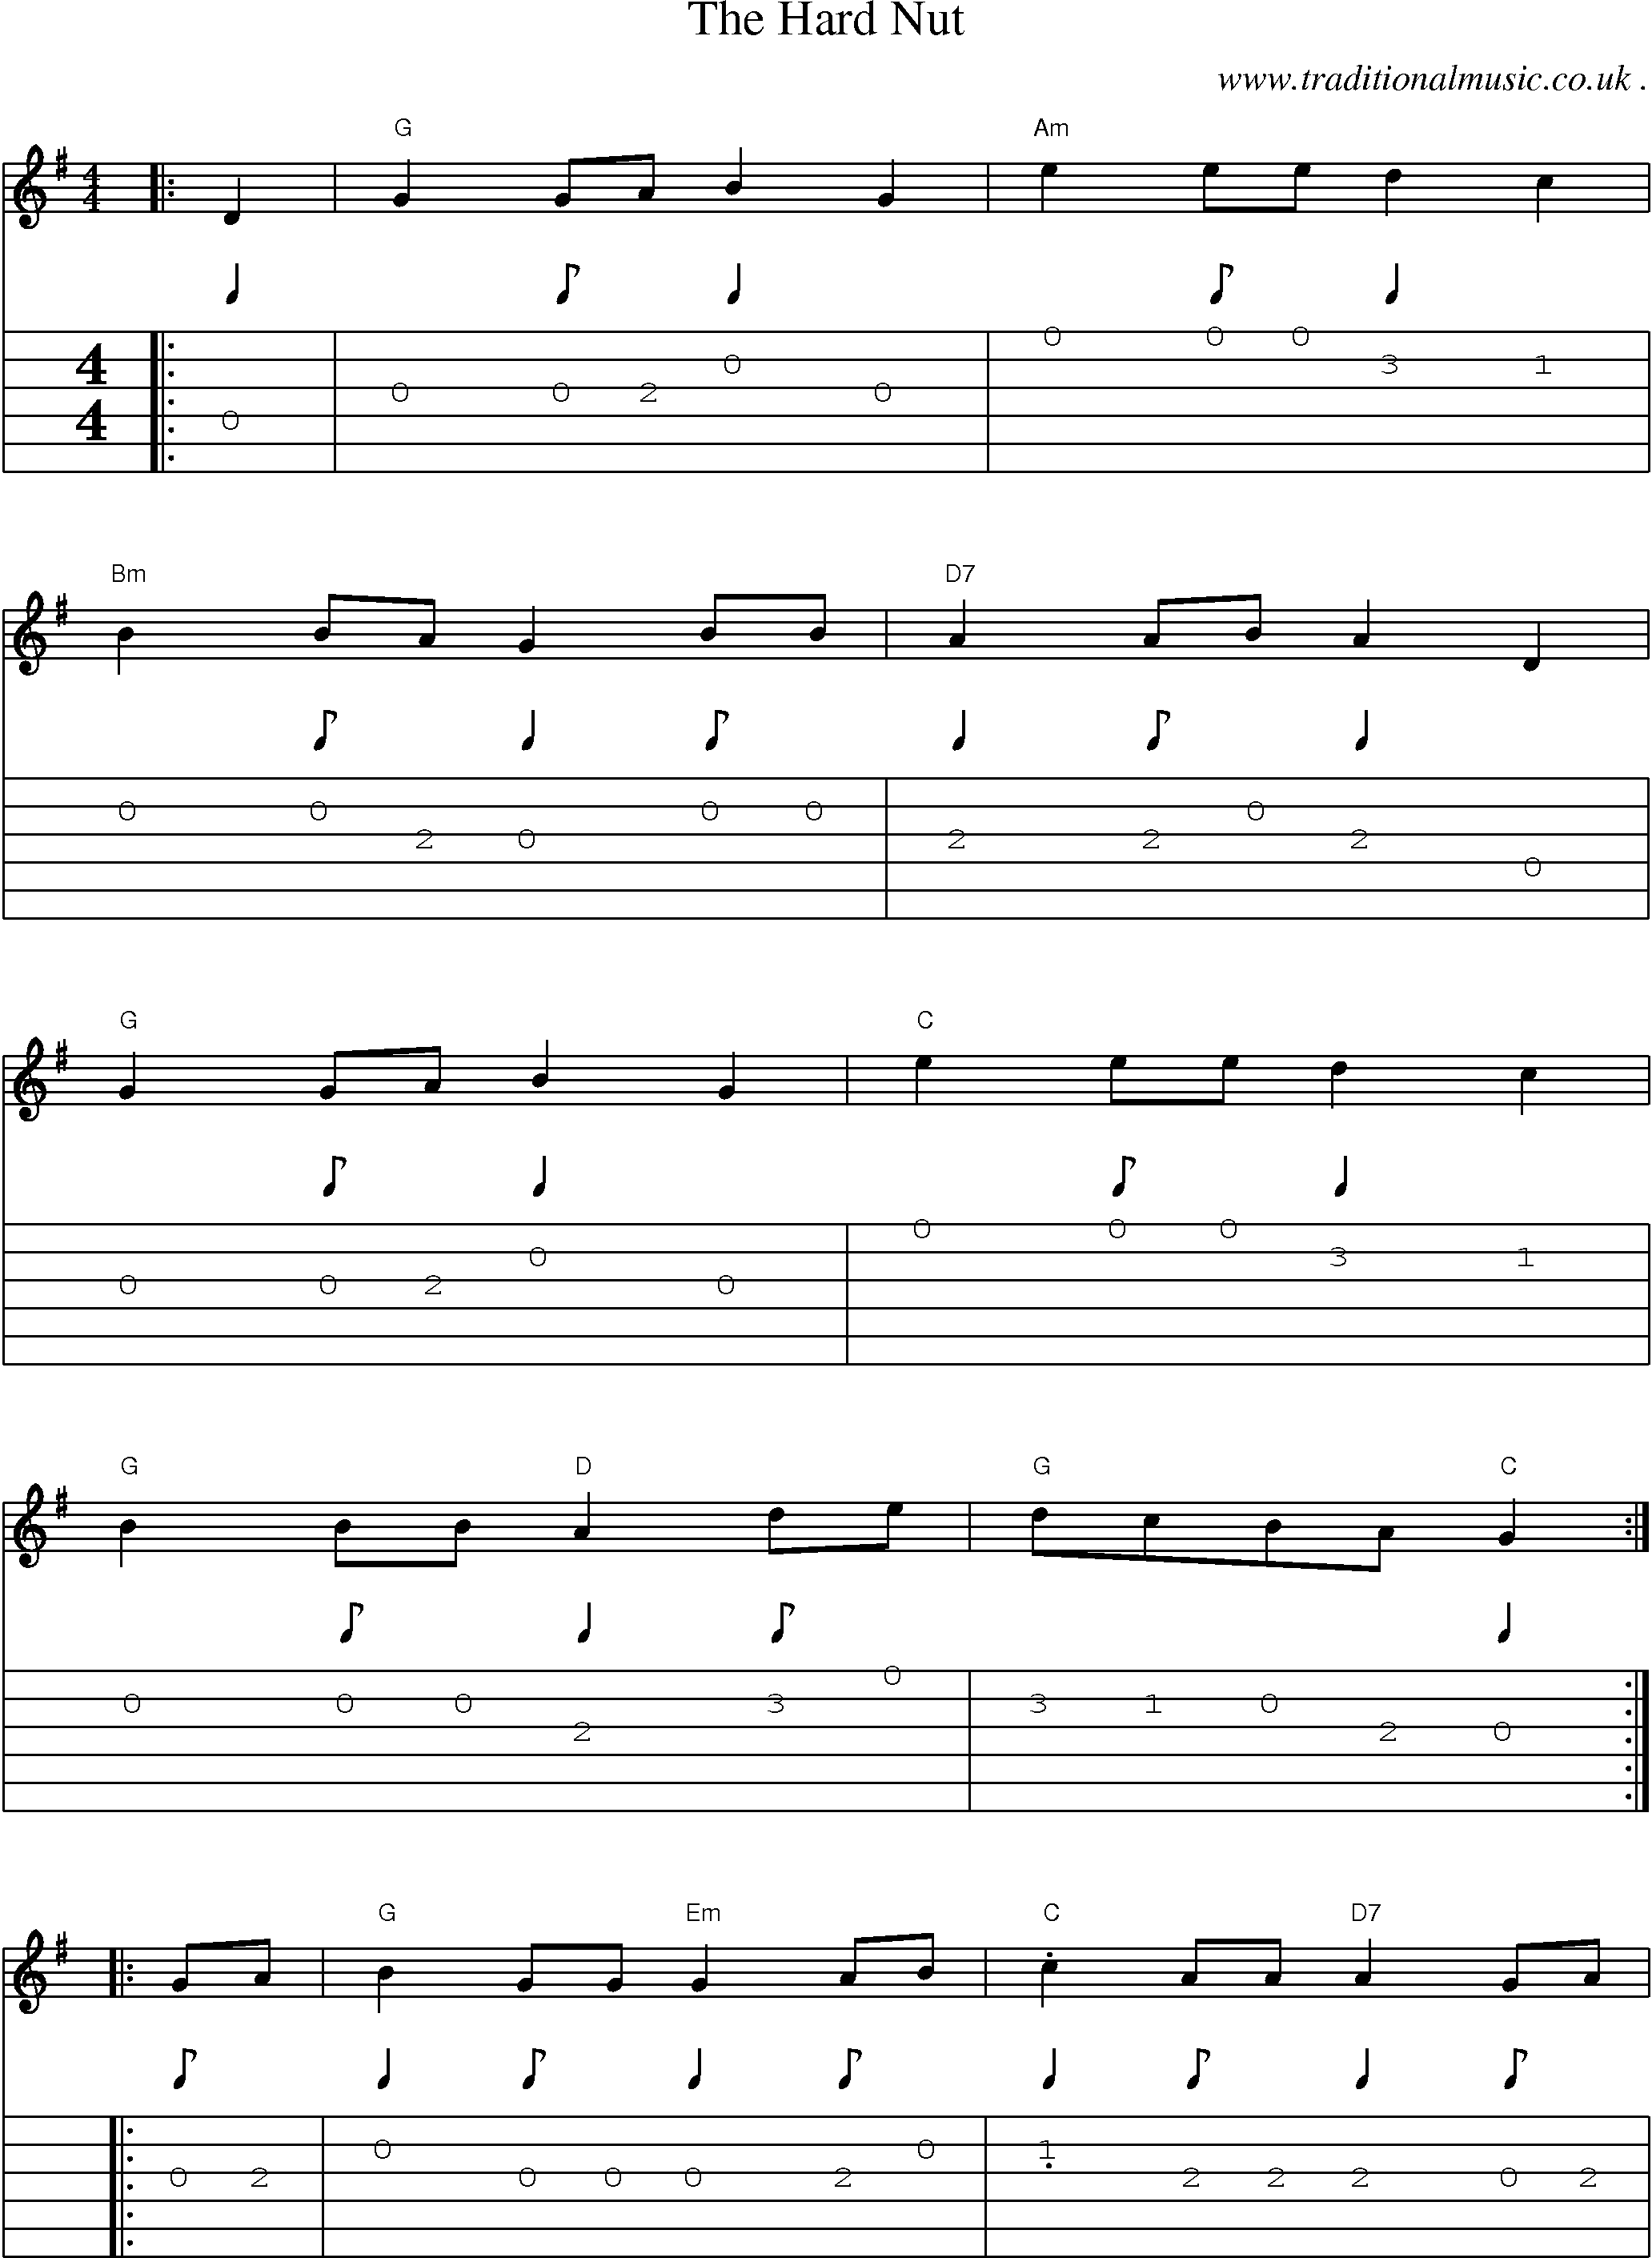 Sheet-Music and Guitar Tabs for The Hard Nut